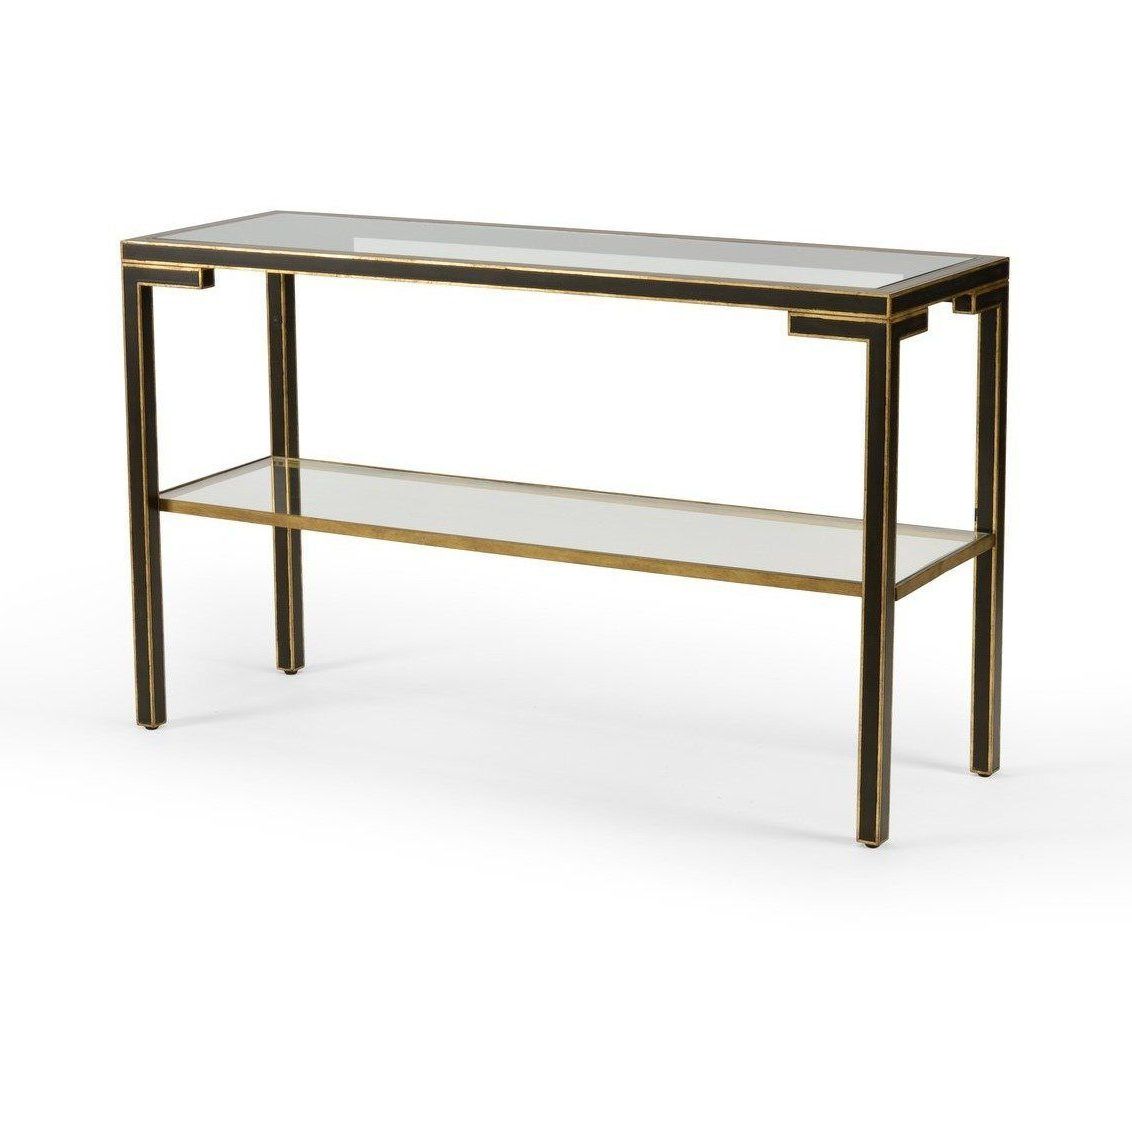 Chelsea House Decker Console 381874 | Products | Console, House, Chelsea For Parsons Grey Marble Top & Brass Base 48x16 Console Tables (View 11 of 20)